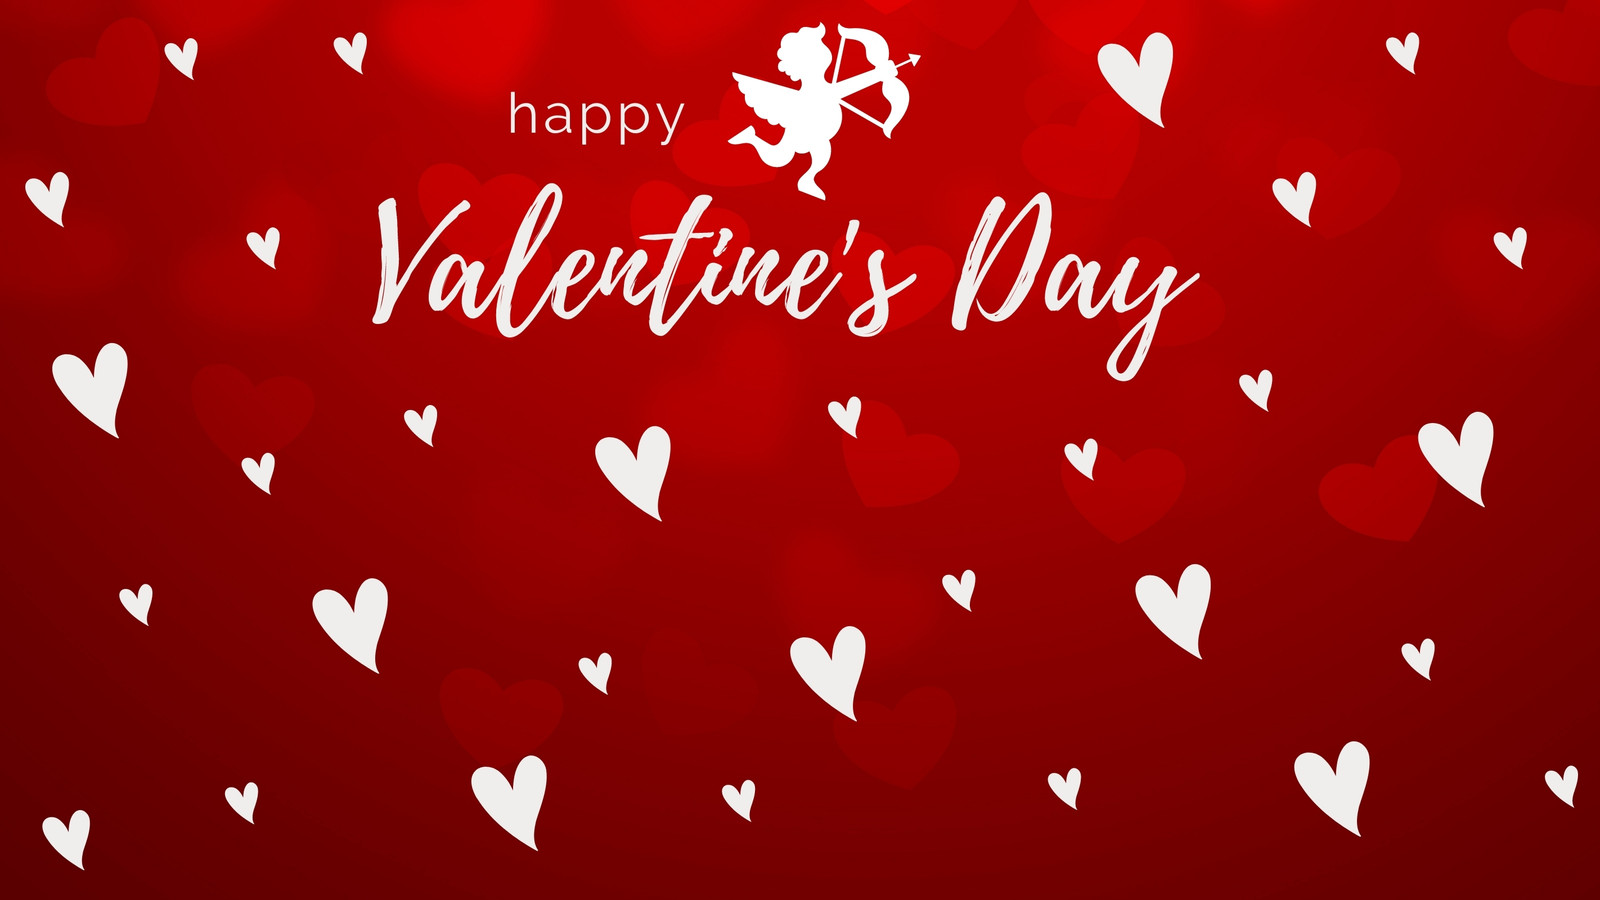 Page 2 - Free Valentine's Day Zoom virtual background templates | Canva